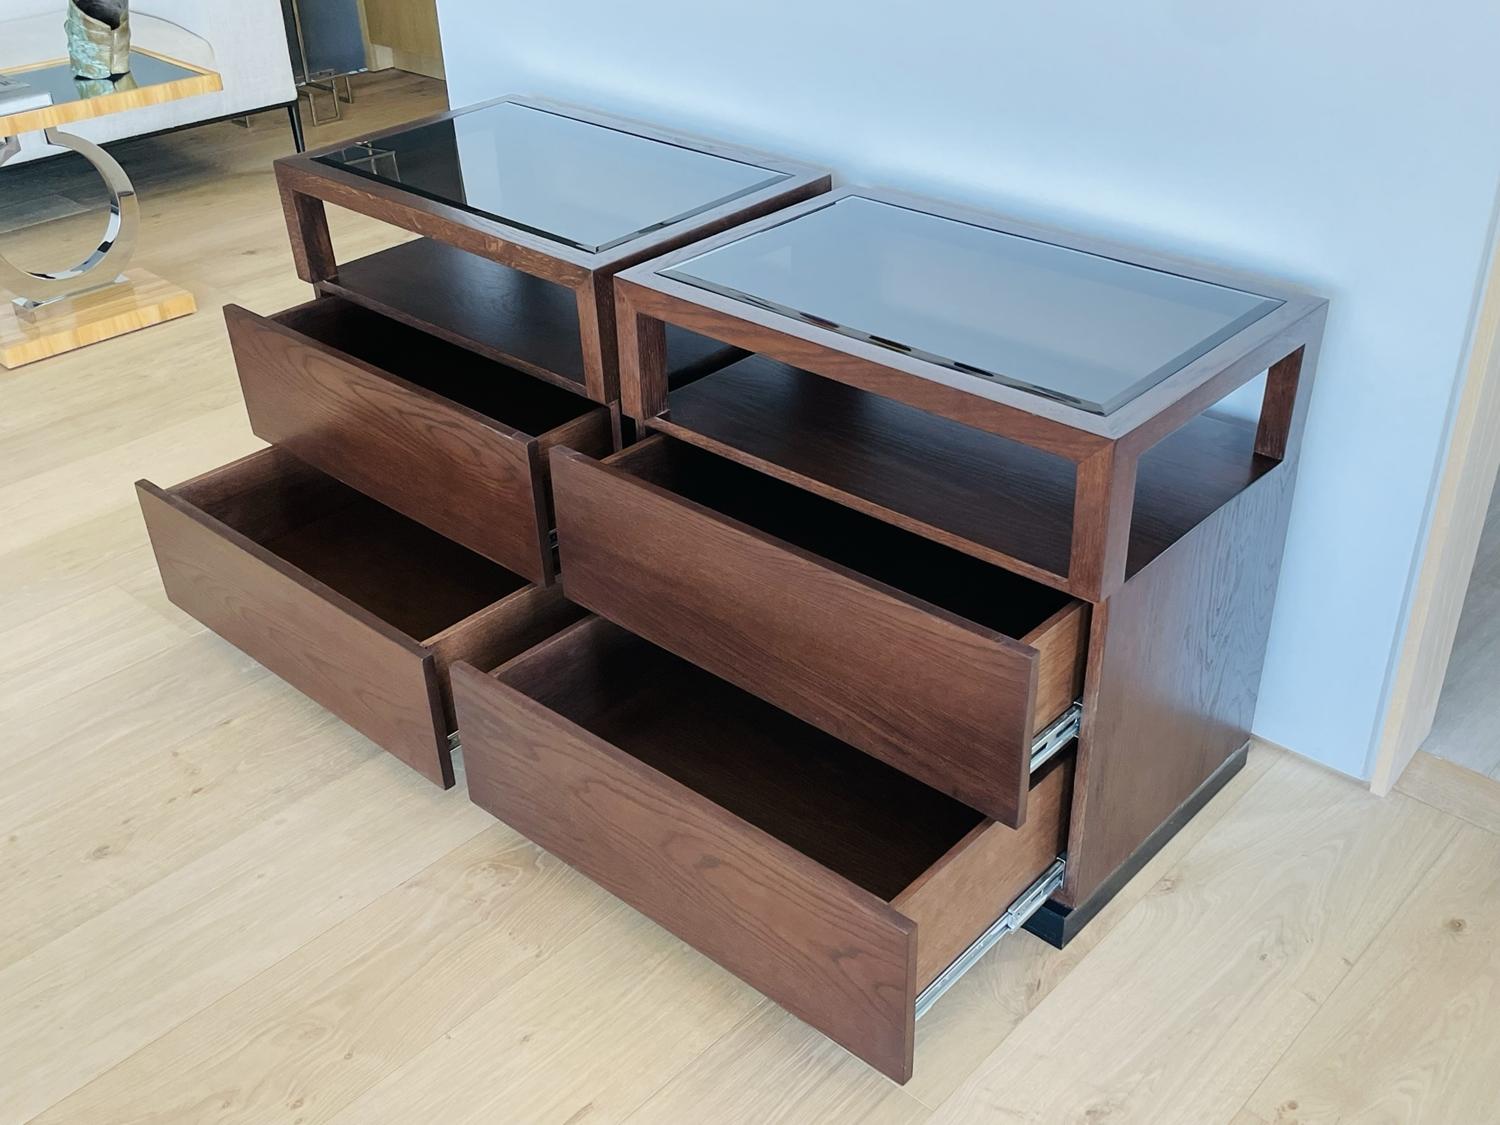 Pair of Nightstands by Cain Modern Made in Solid Oak and Bronzed Lucite For Sale 6